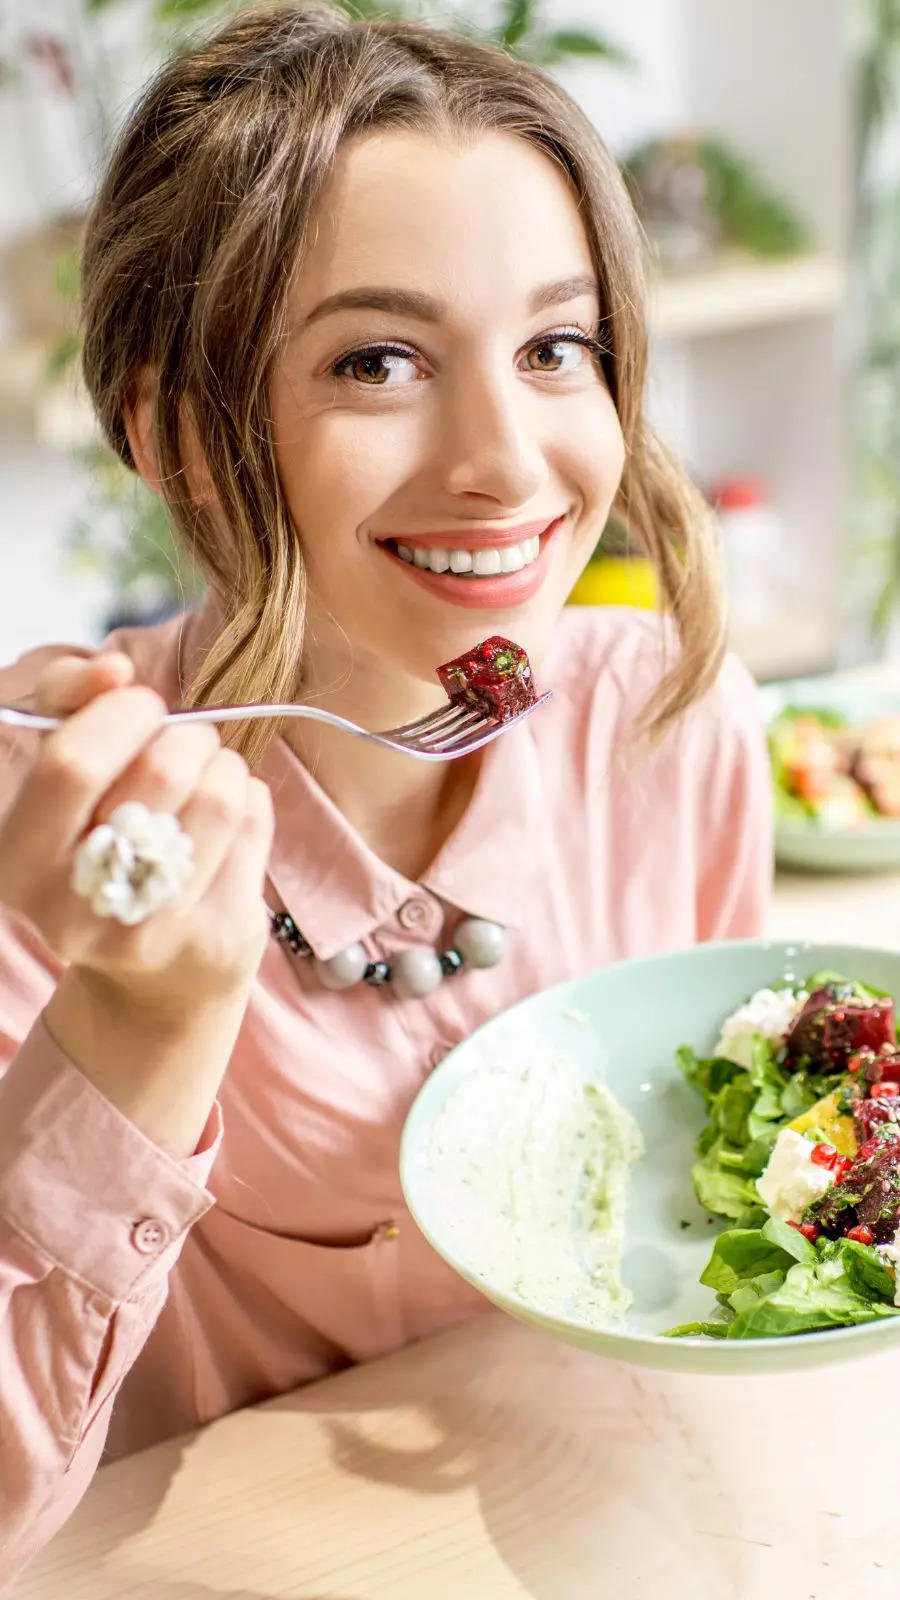 Vegetarian foods to boost collagen and make you look young forever